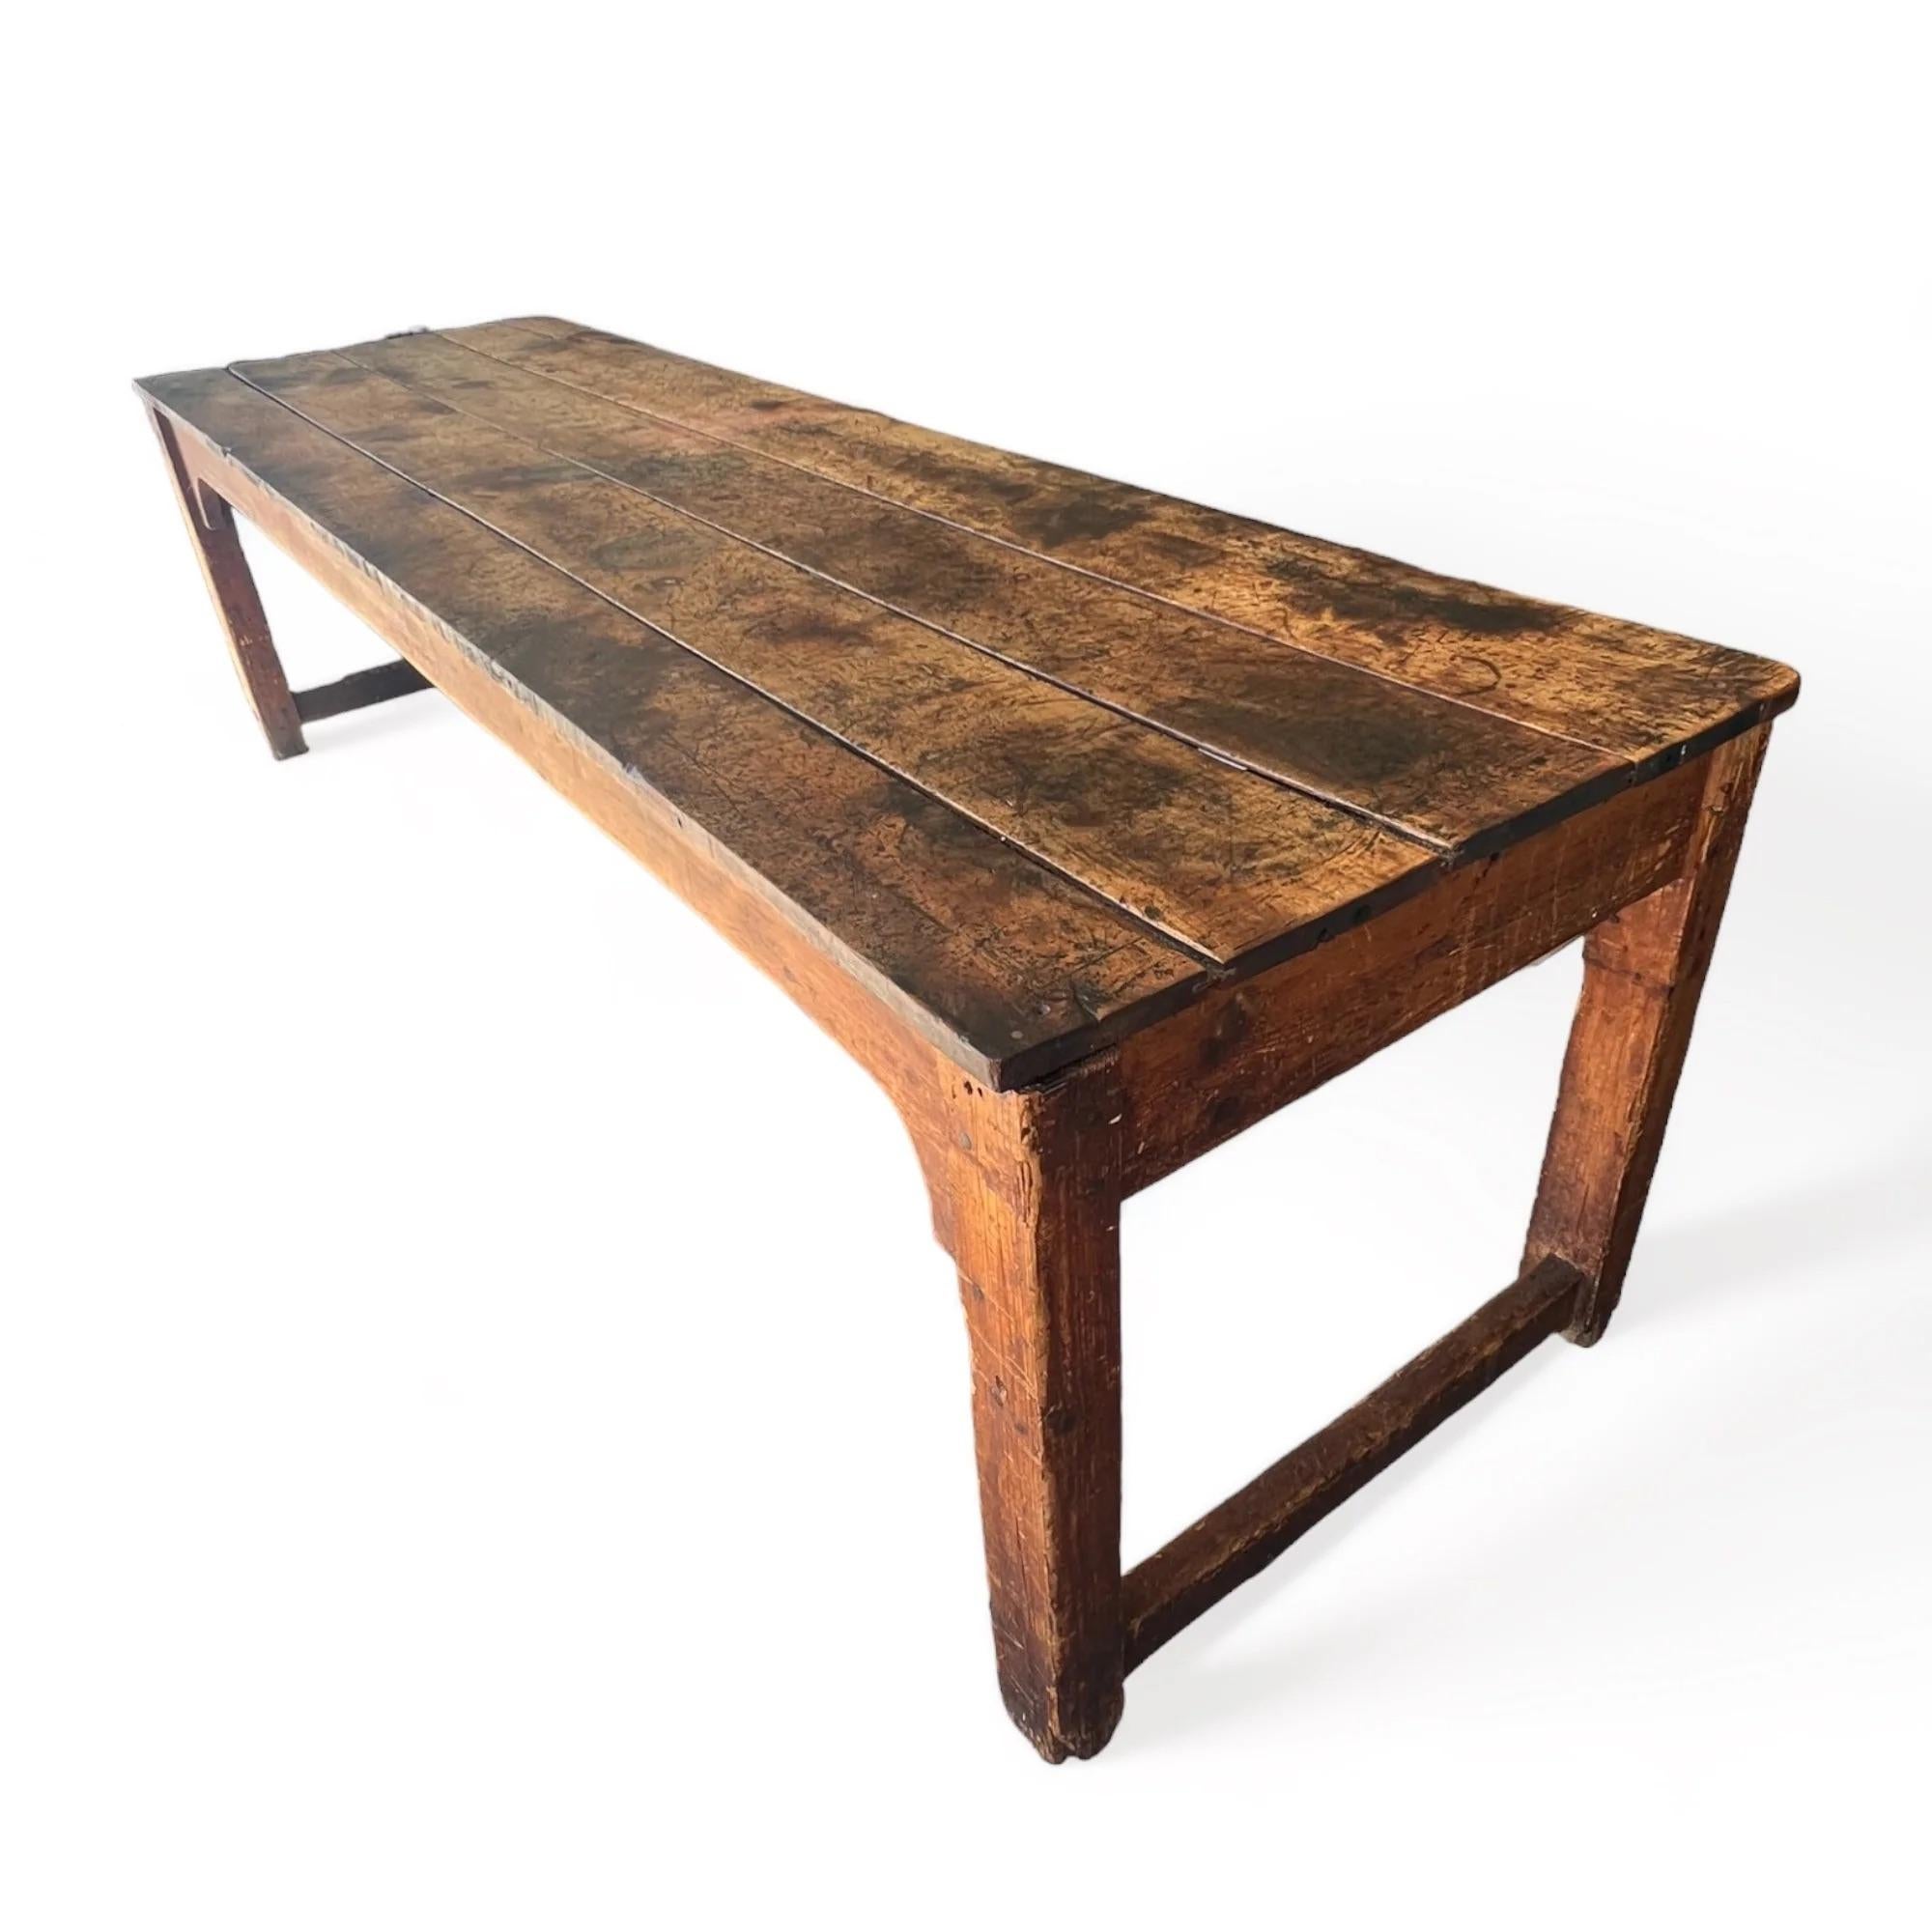 Created in the early 20th century, this wooden table exudes a farmhouse style charm with its traditional joinery, showcasing a thick and enduring build. The table has developed a beautiful patina across its surface over the years, reflecting its